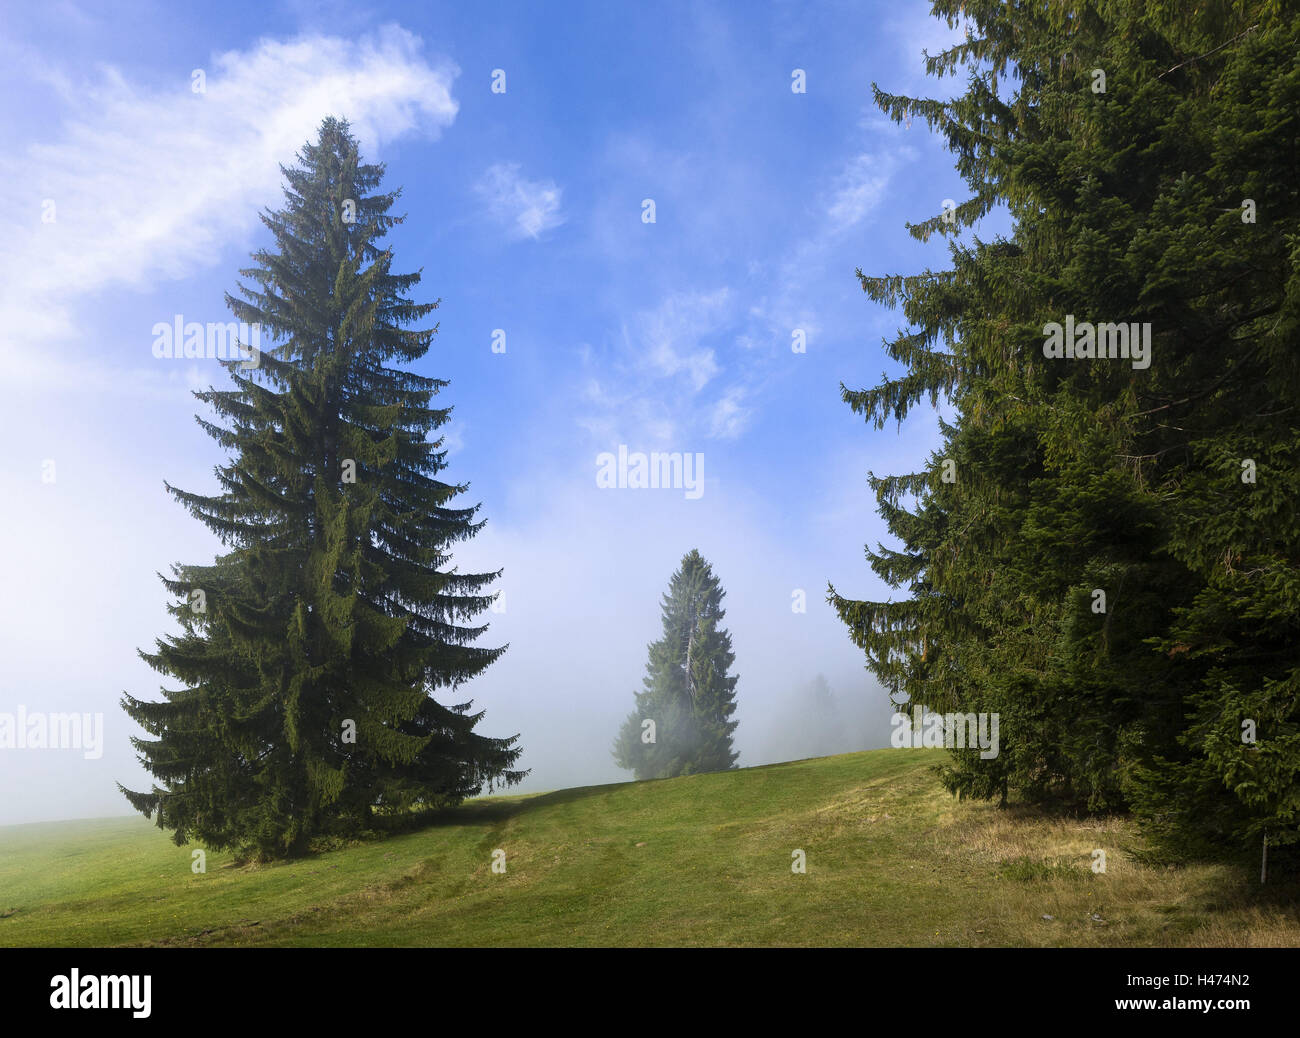 Meadow, trees, fog, flora, plant world, nature, plant, wood, scenery, weather, conifers, Germany, Allgäu, Bavaria, Europe, Immenstadt, Diepholz, Immenstadt Diepholz, South Germany, Stock Photo